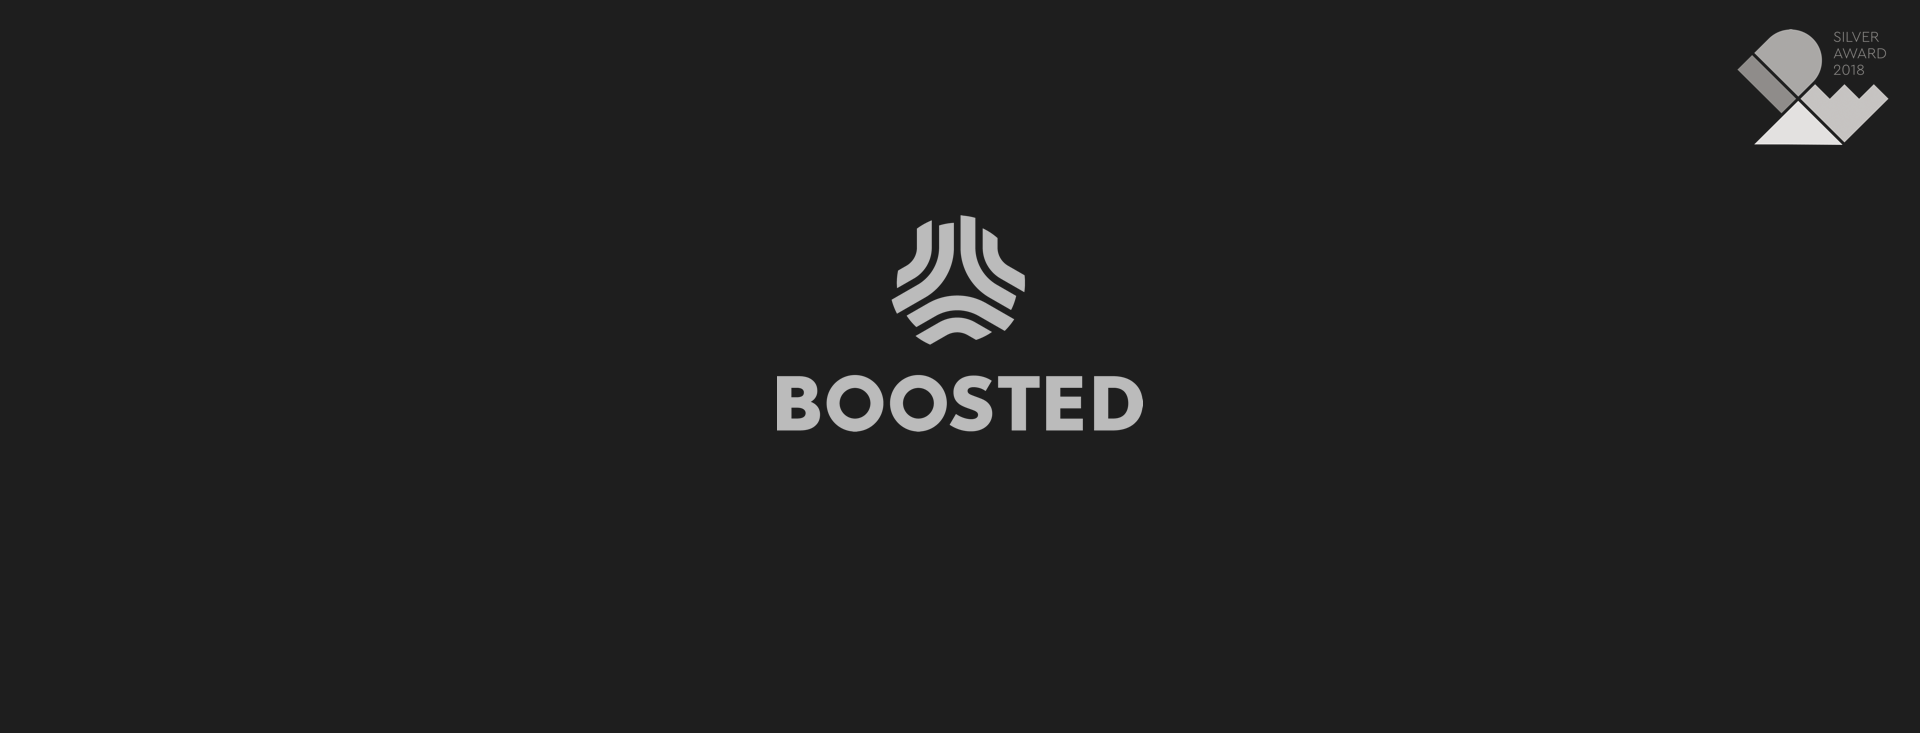 Industrial Design: Boosted Backpack